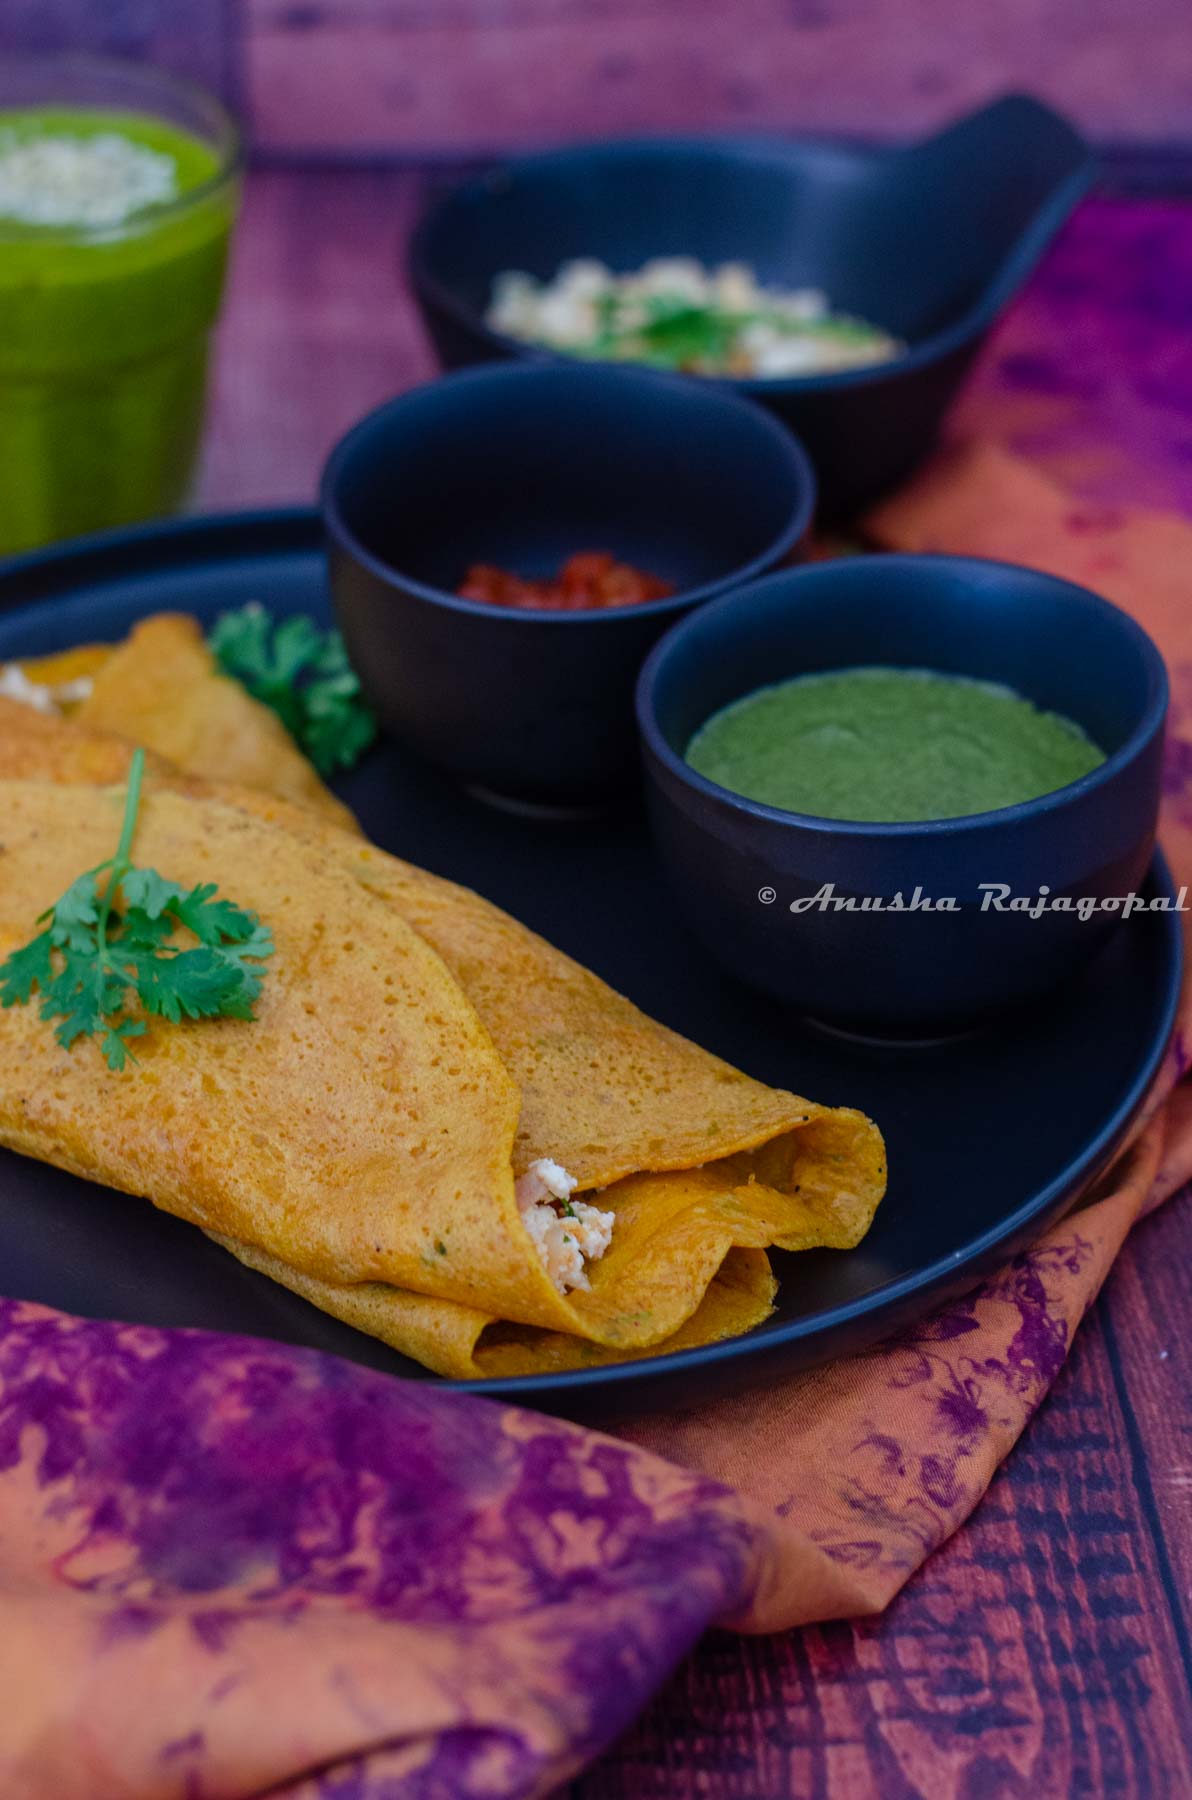 Moong dal cheelas stuffed with paneer and served with chutneys and a smoothie